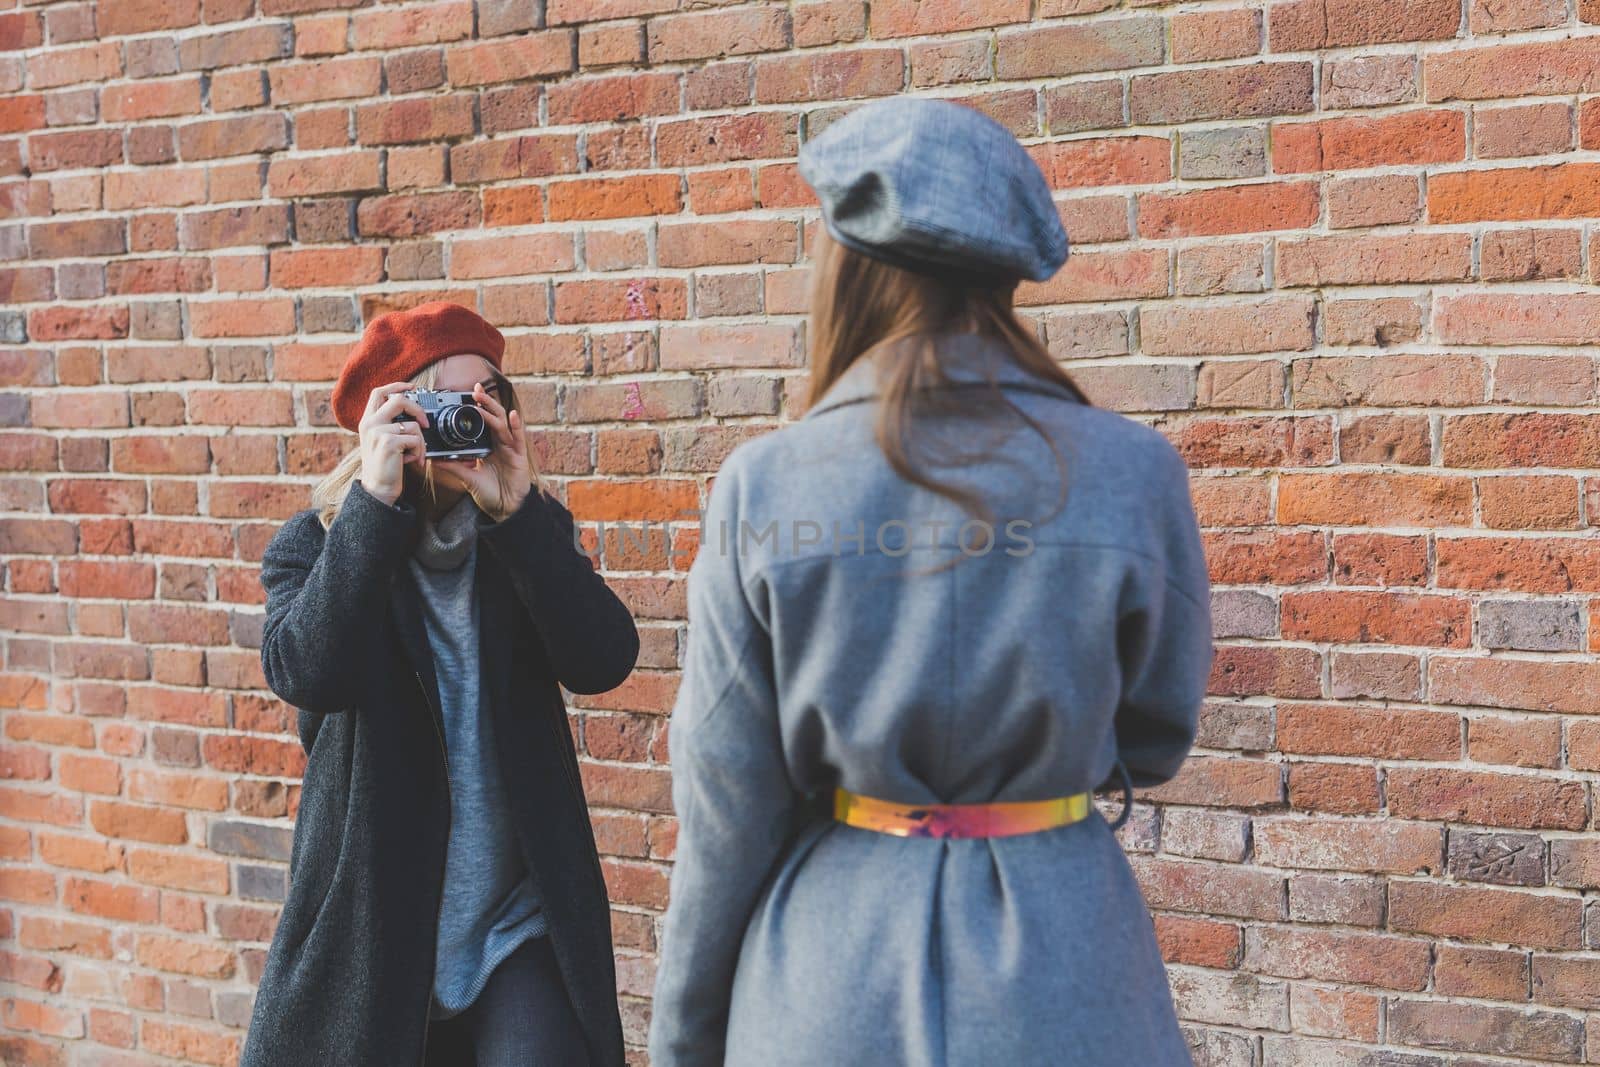 Girl takes picture of her female friend in front of brick wall in urban street - photographer and youth urban lifestyle